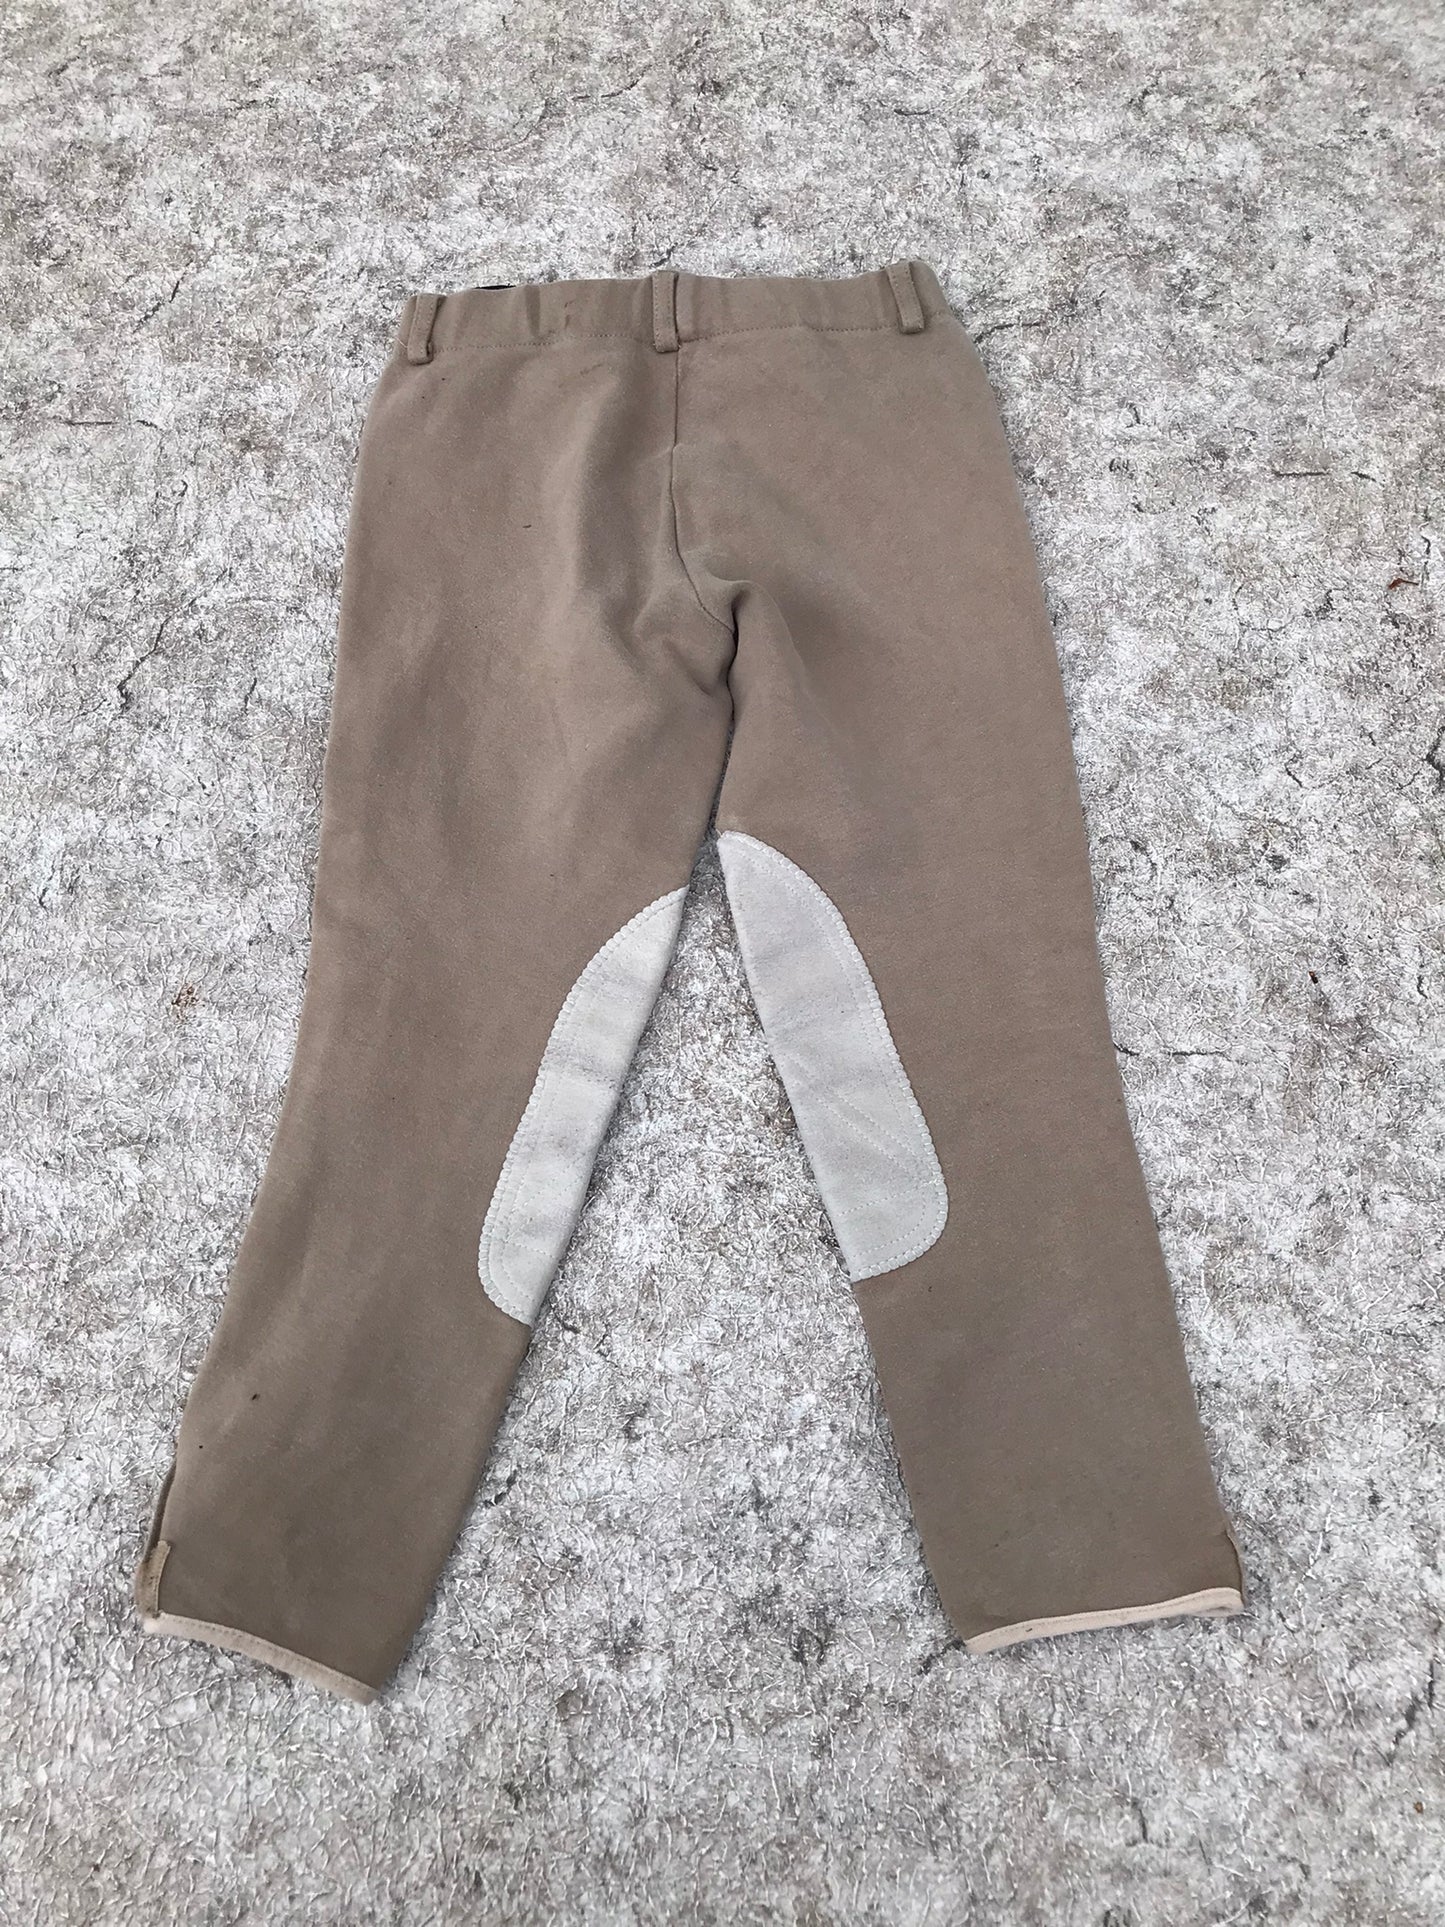 Equestrian Child Size 8 Horse Back Riding Pants Minor Wear